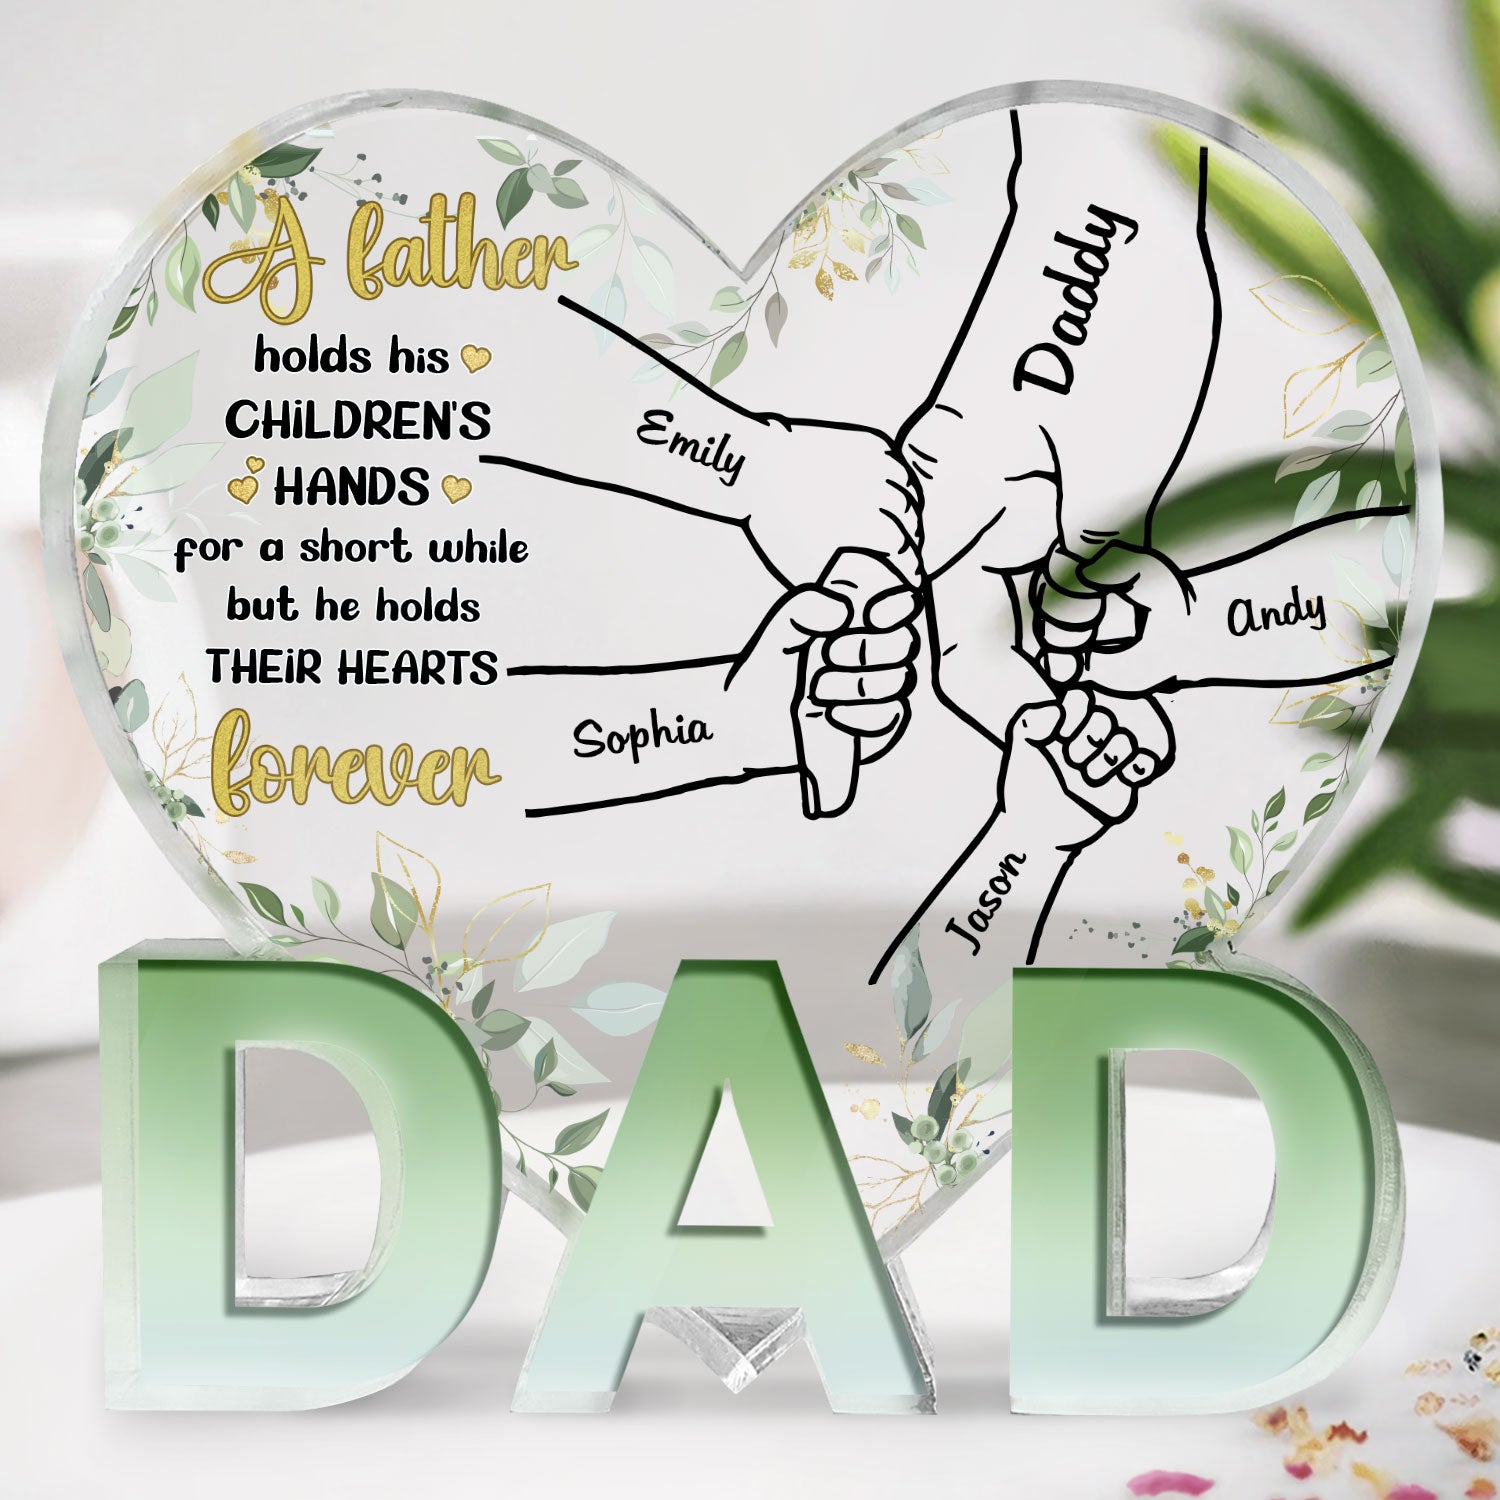 Father Holds His Children's Hearts Forever - Birthday, Loving Gift For Dad, Daddy - Personalized Love-Dad-Shaped Acrylic Plaque